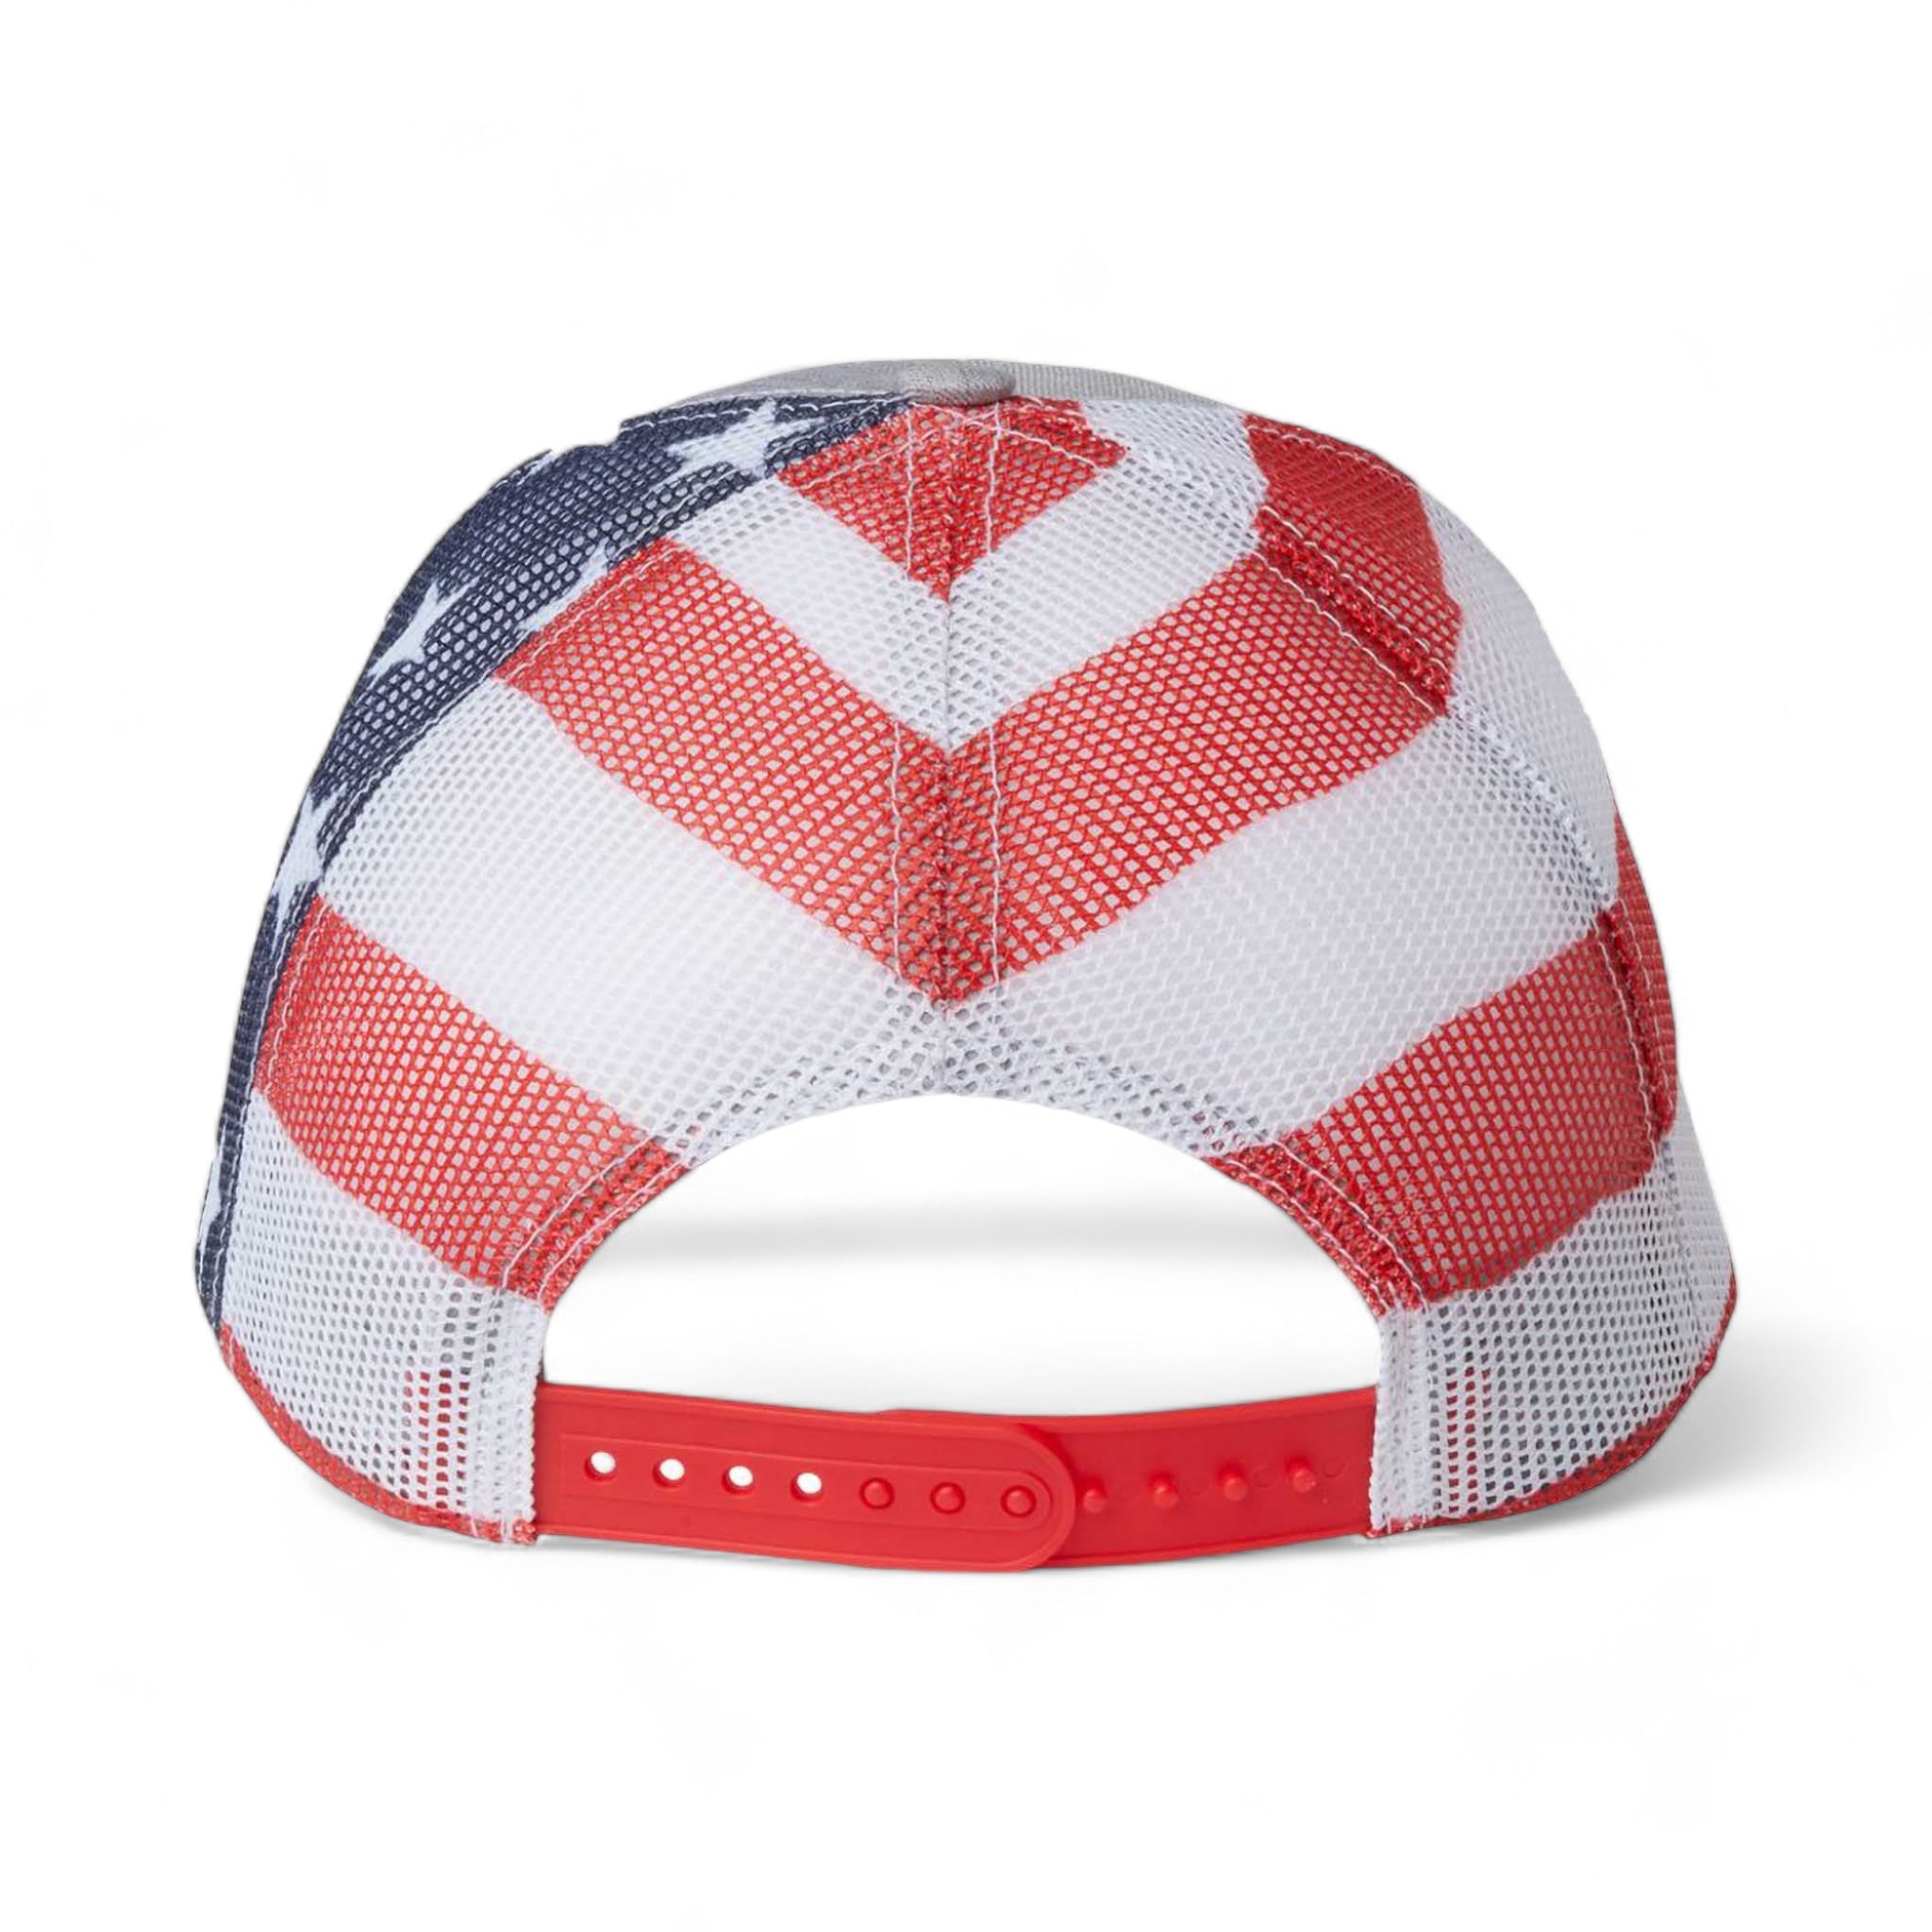 Back view of Kati S700M custom hat in heather and usa flag